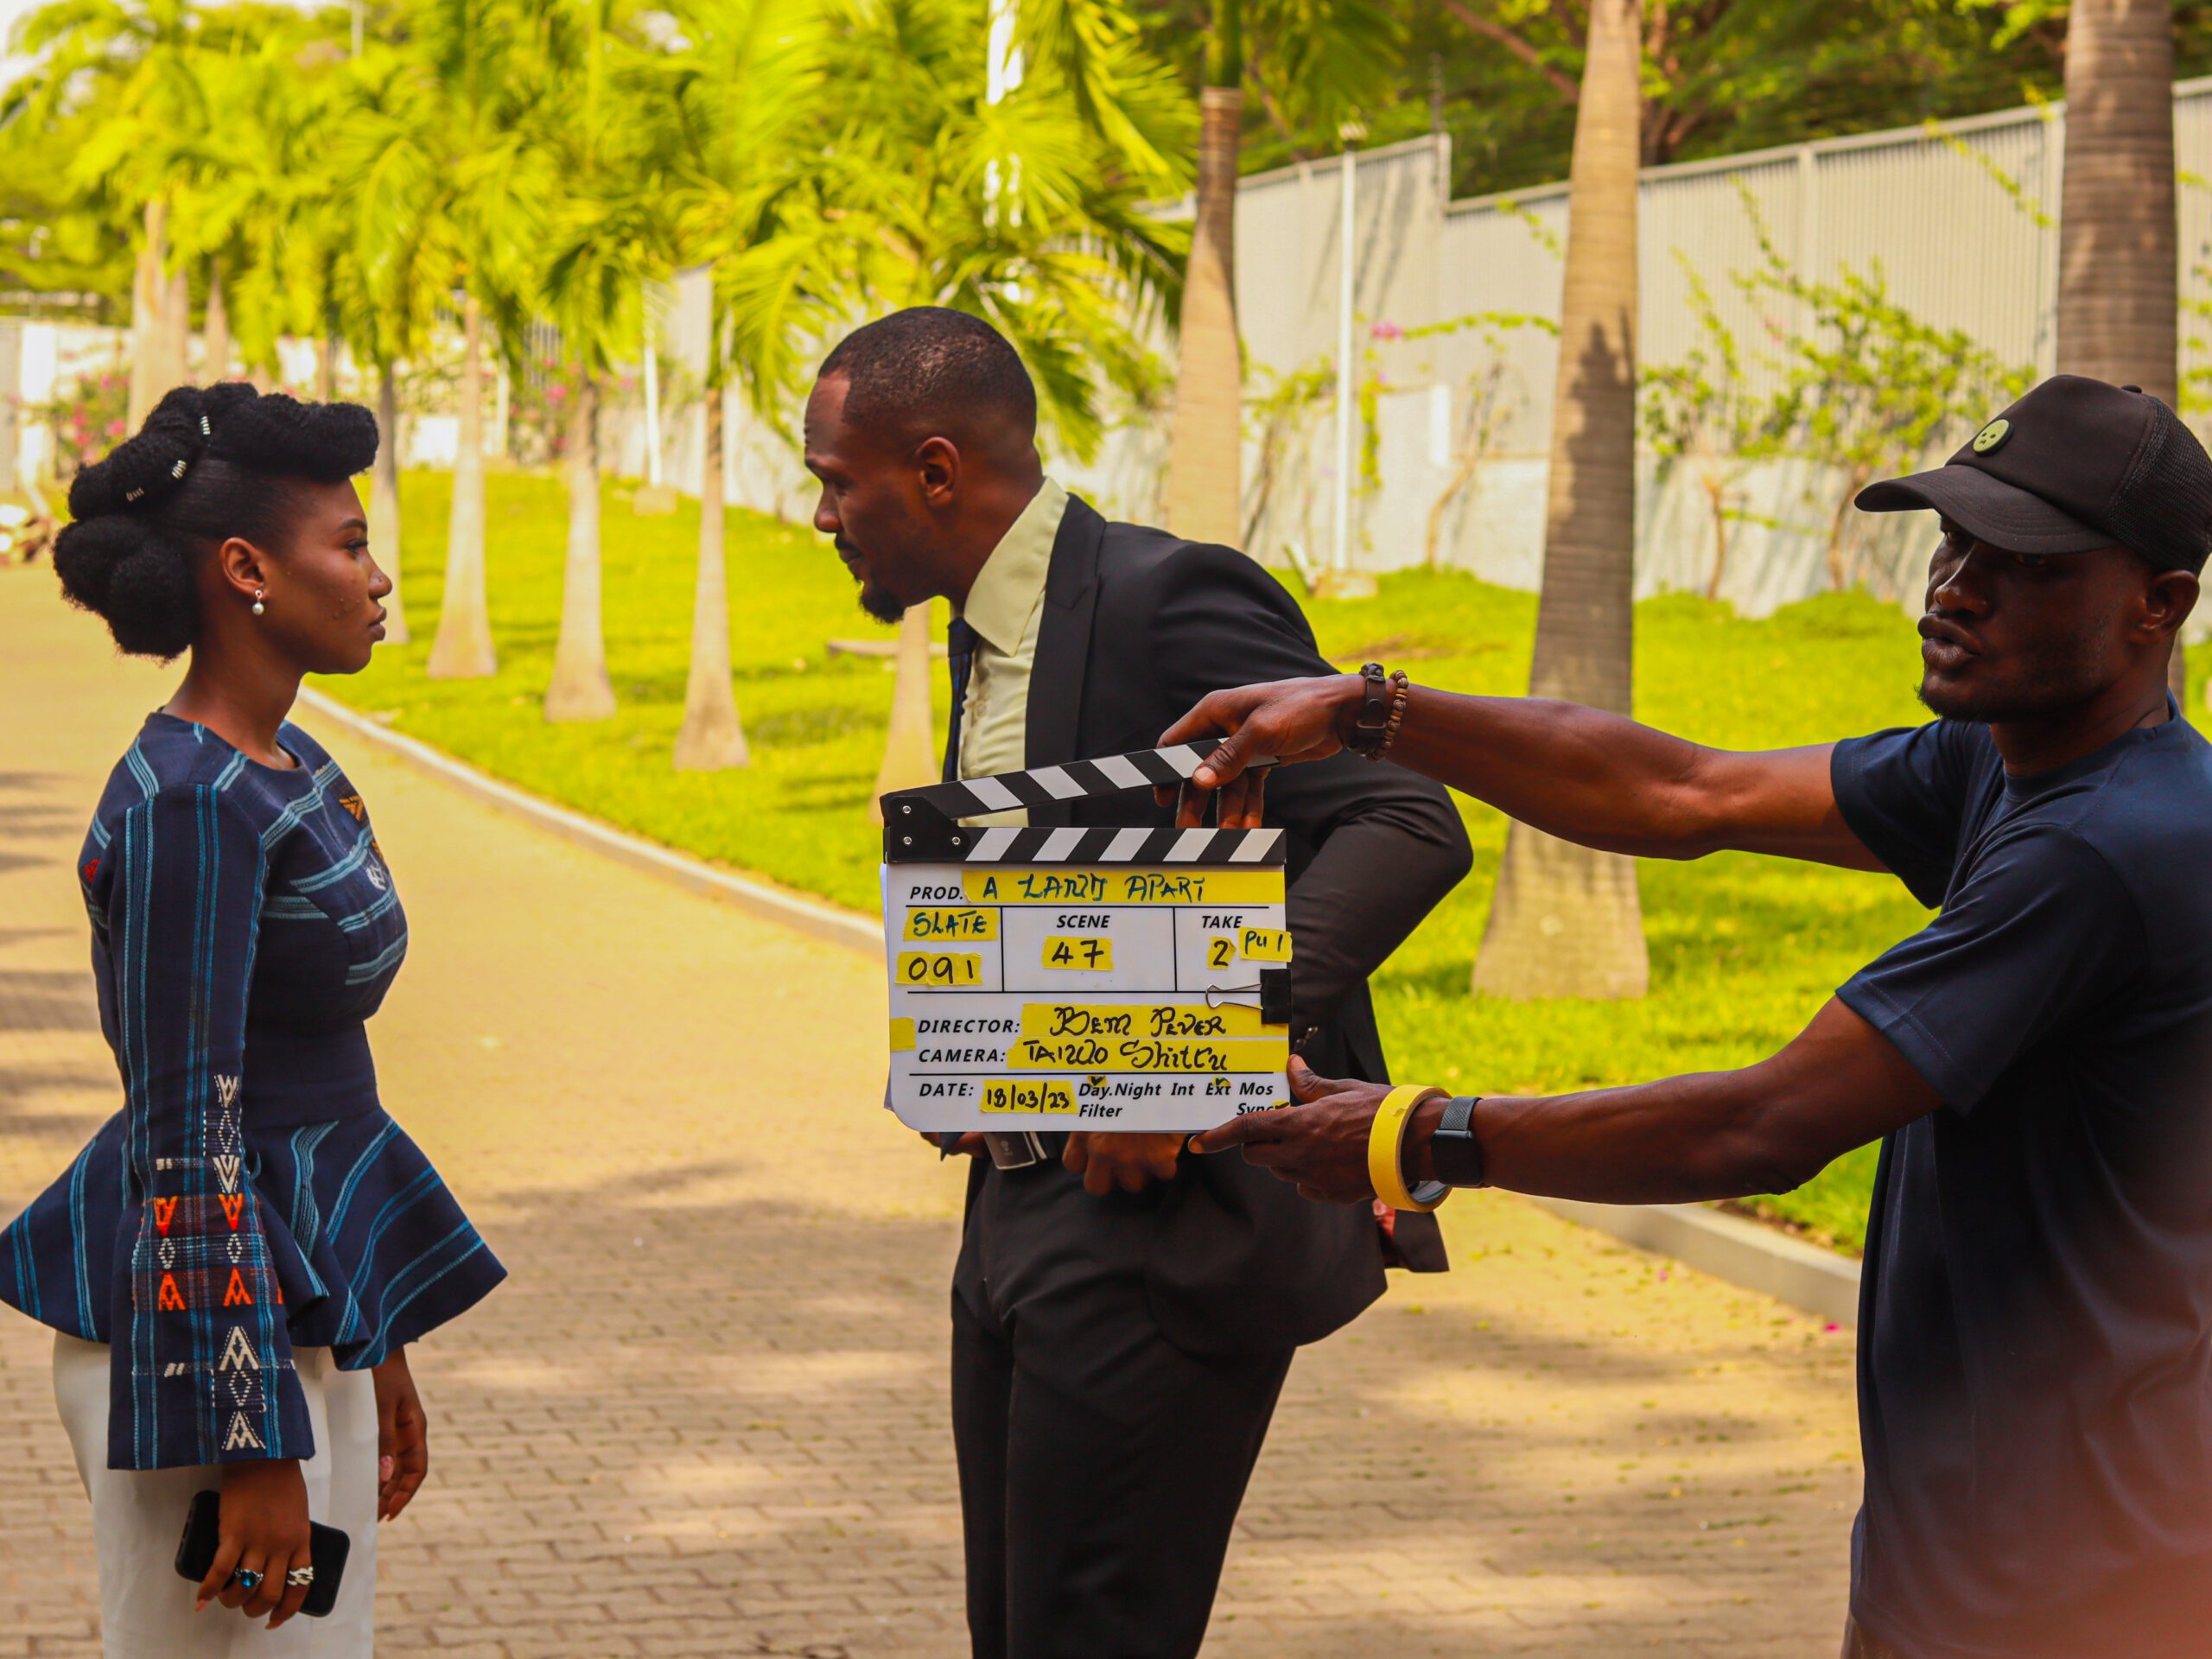 IMG 9273 scaled - Alt History Drama "A Land Apart" Directed By Bem Pever Begins Principal Photography in Abuja